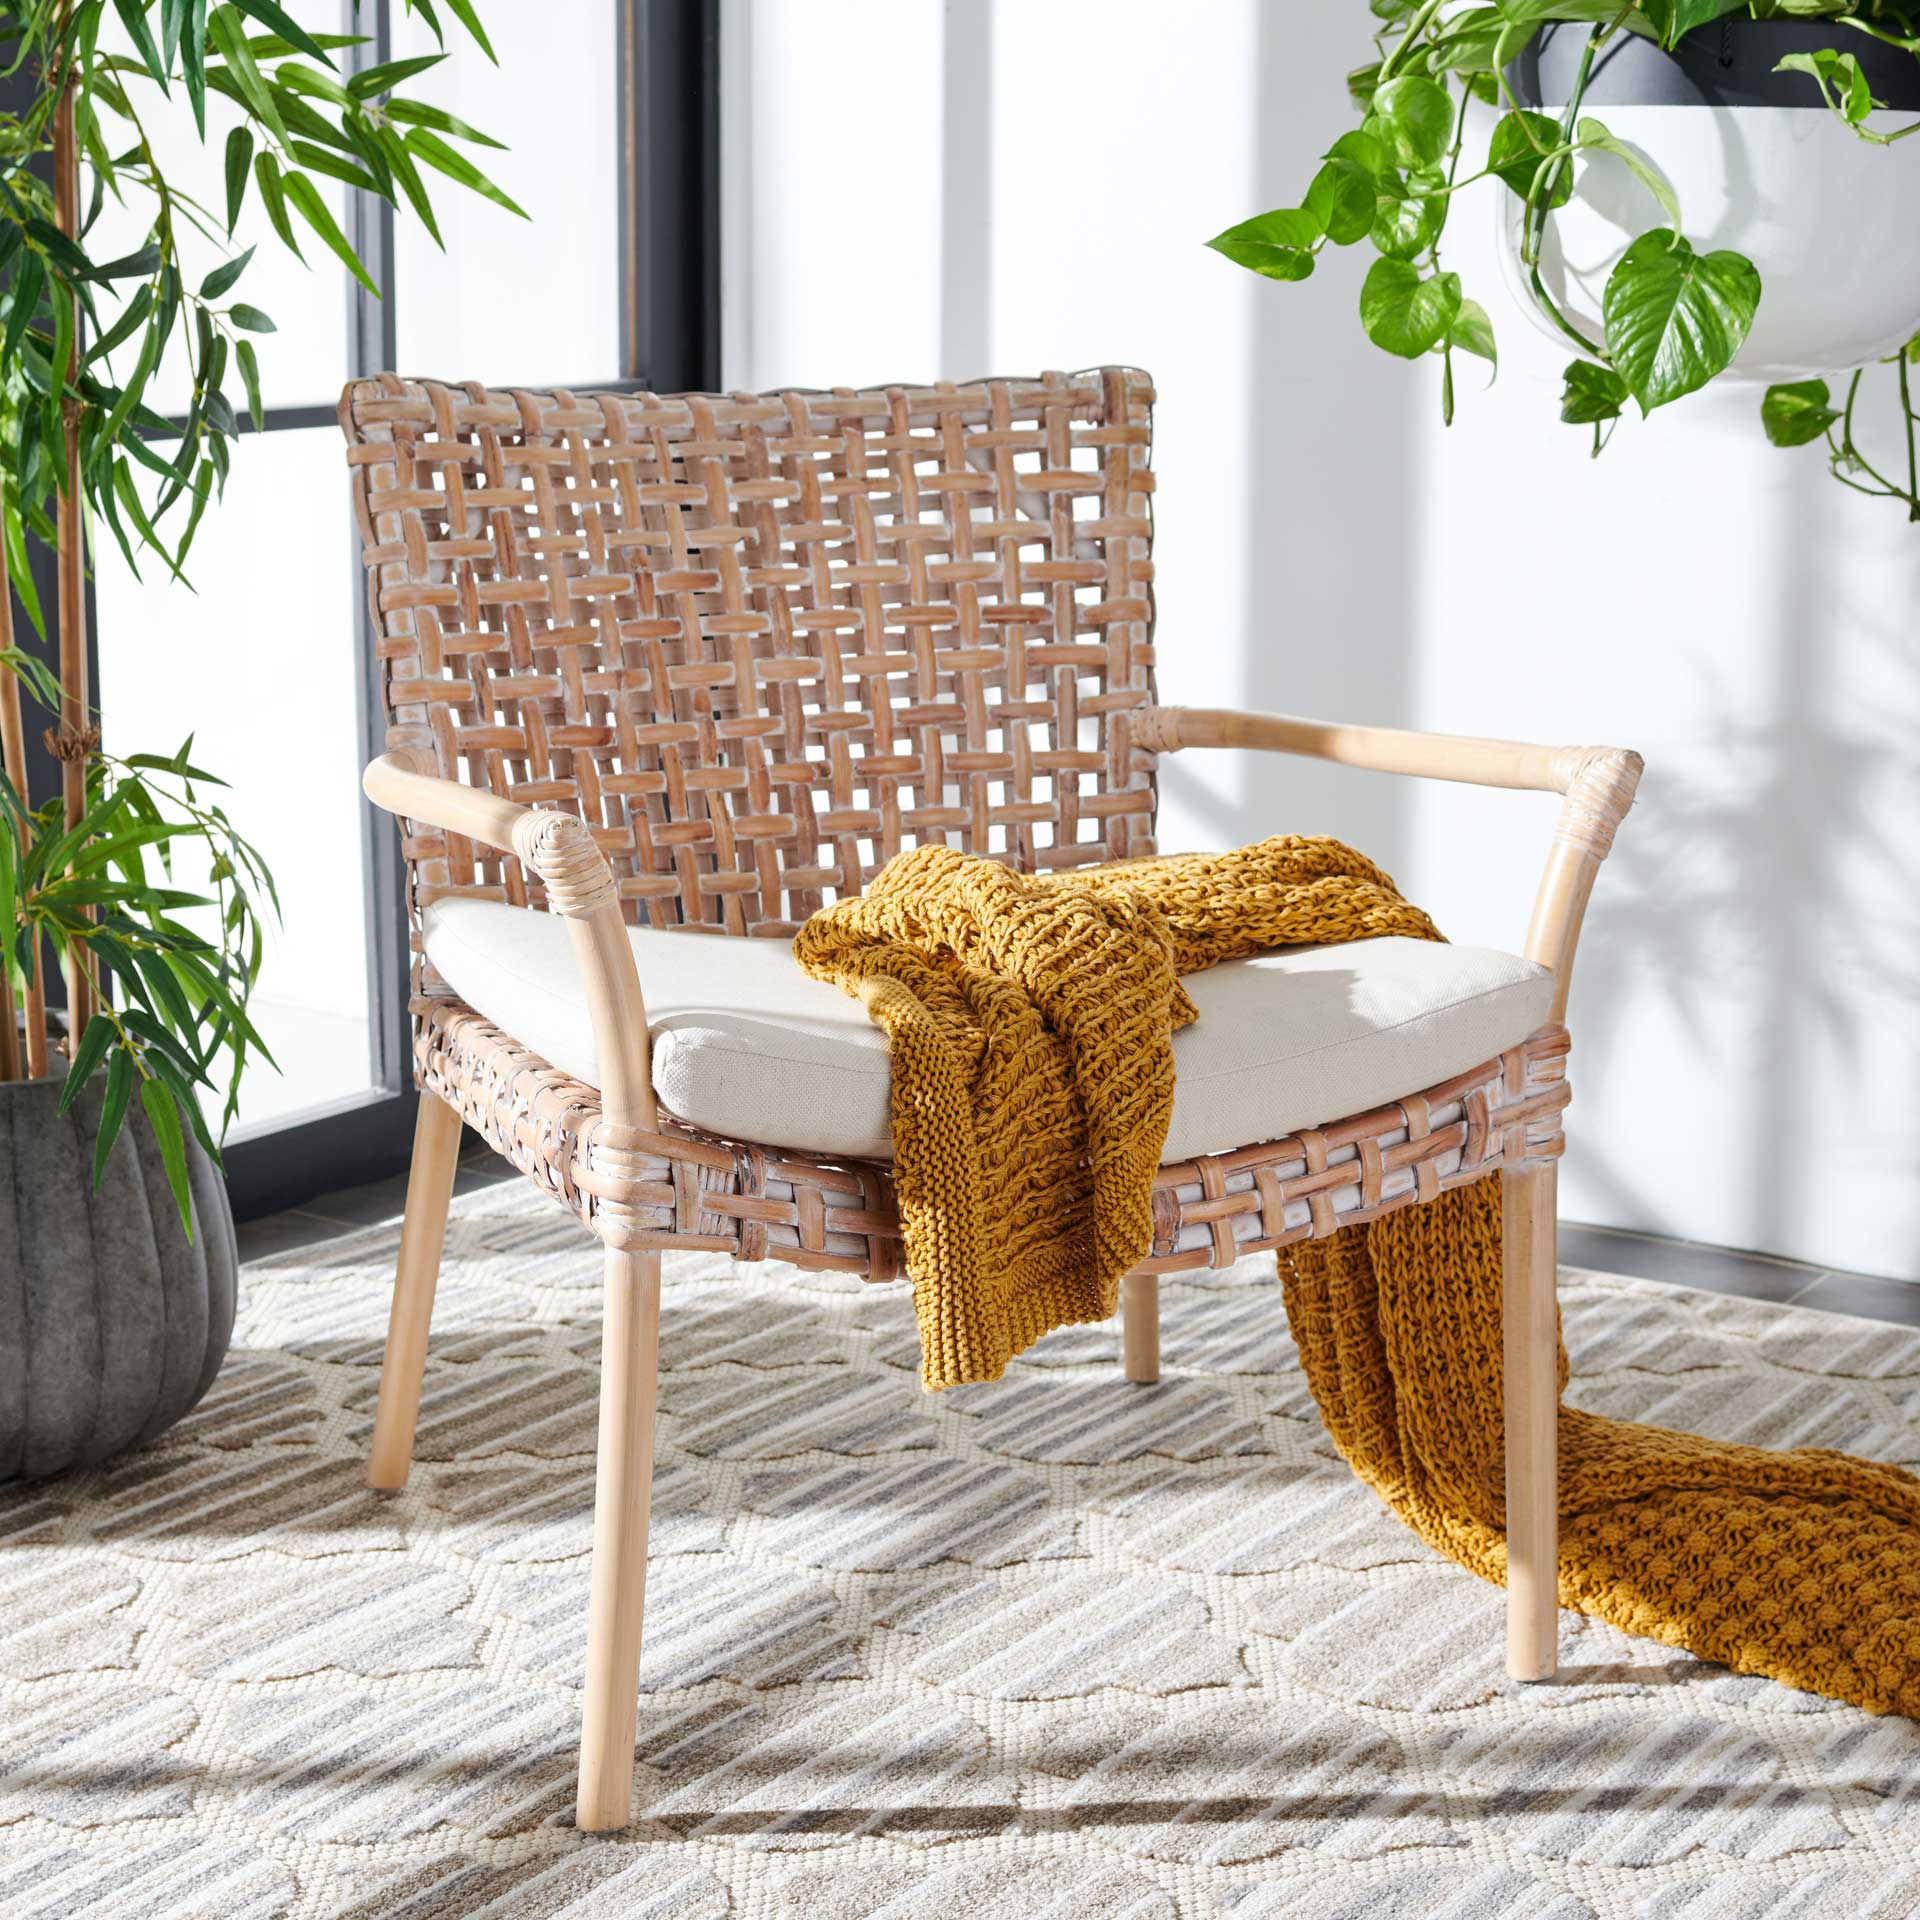 Convey Rattan Accent Chair Natural White Wash